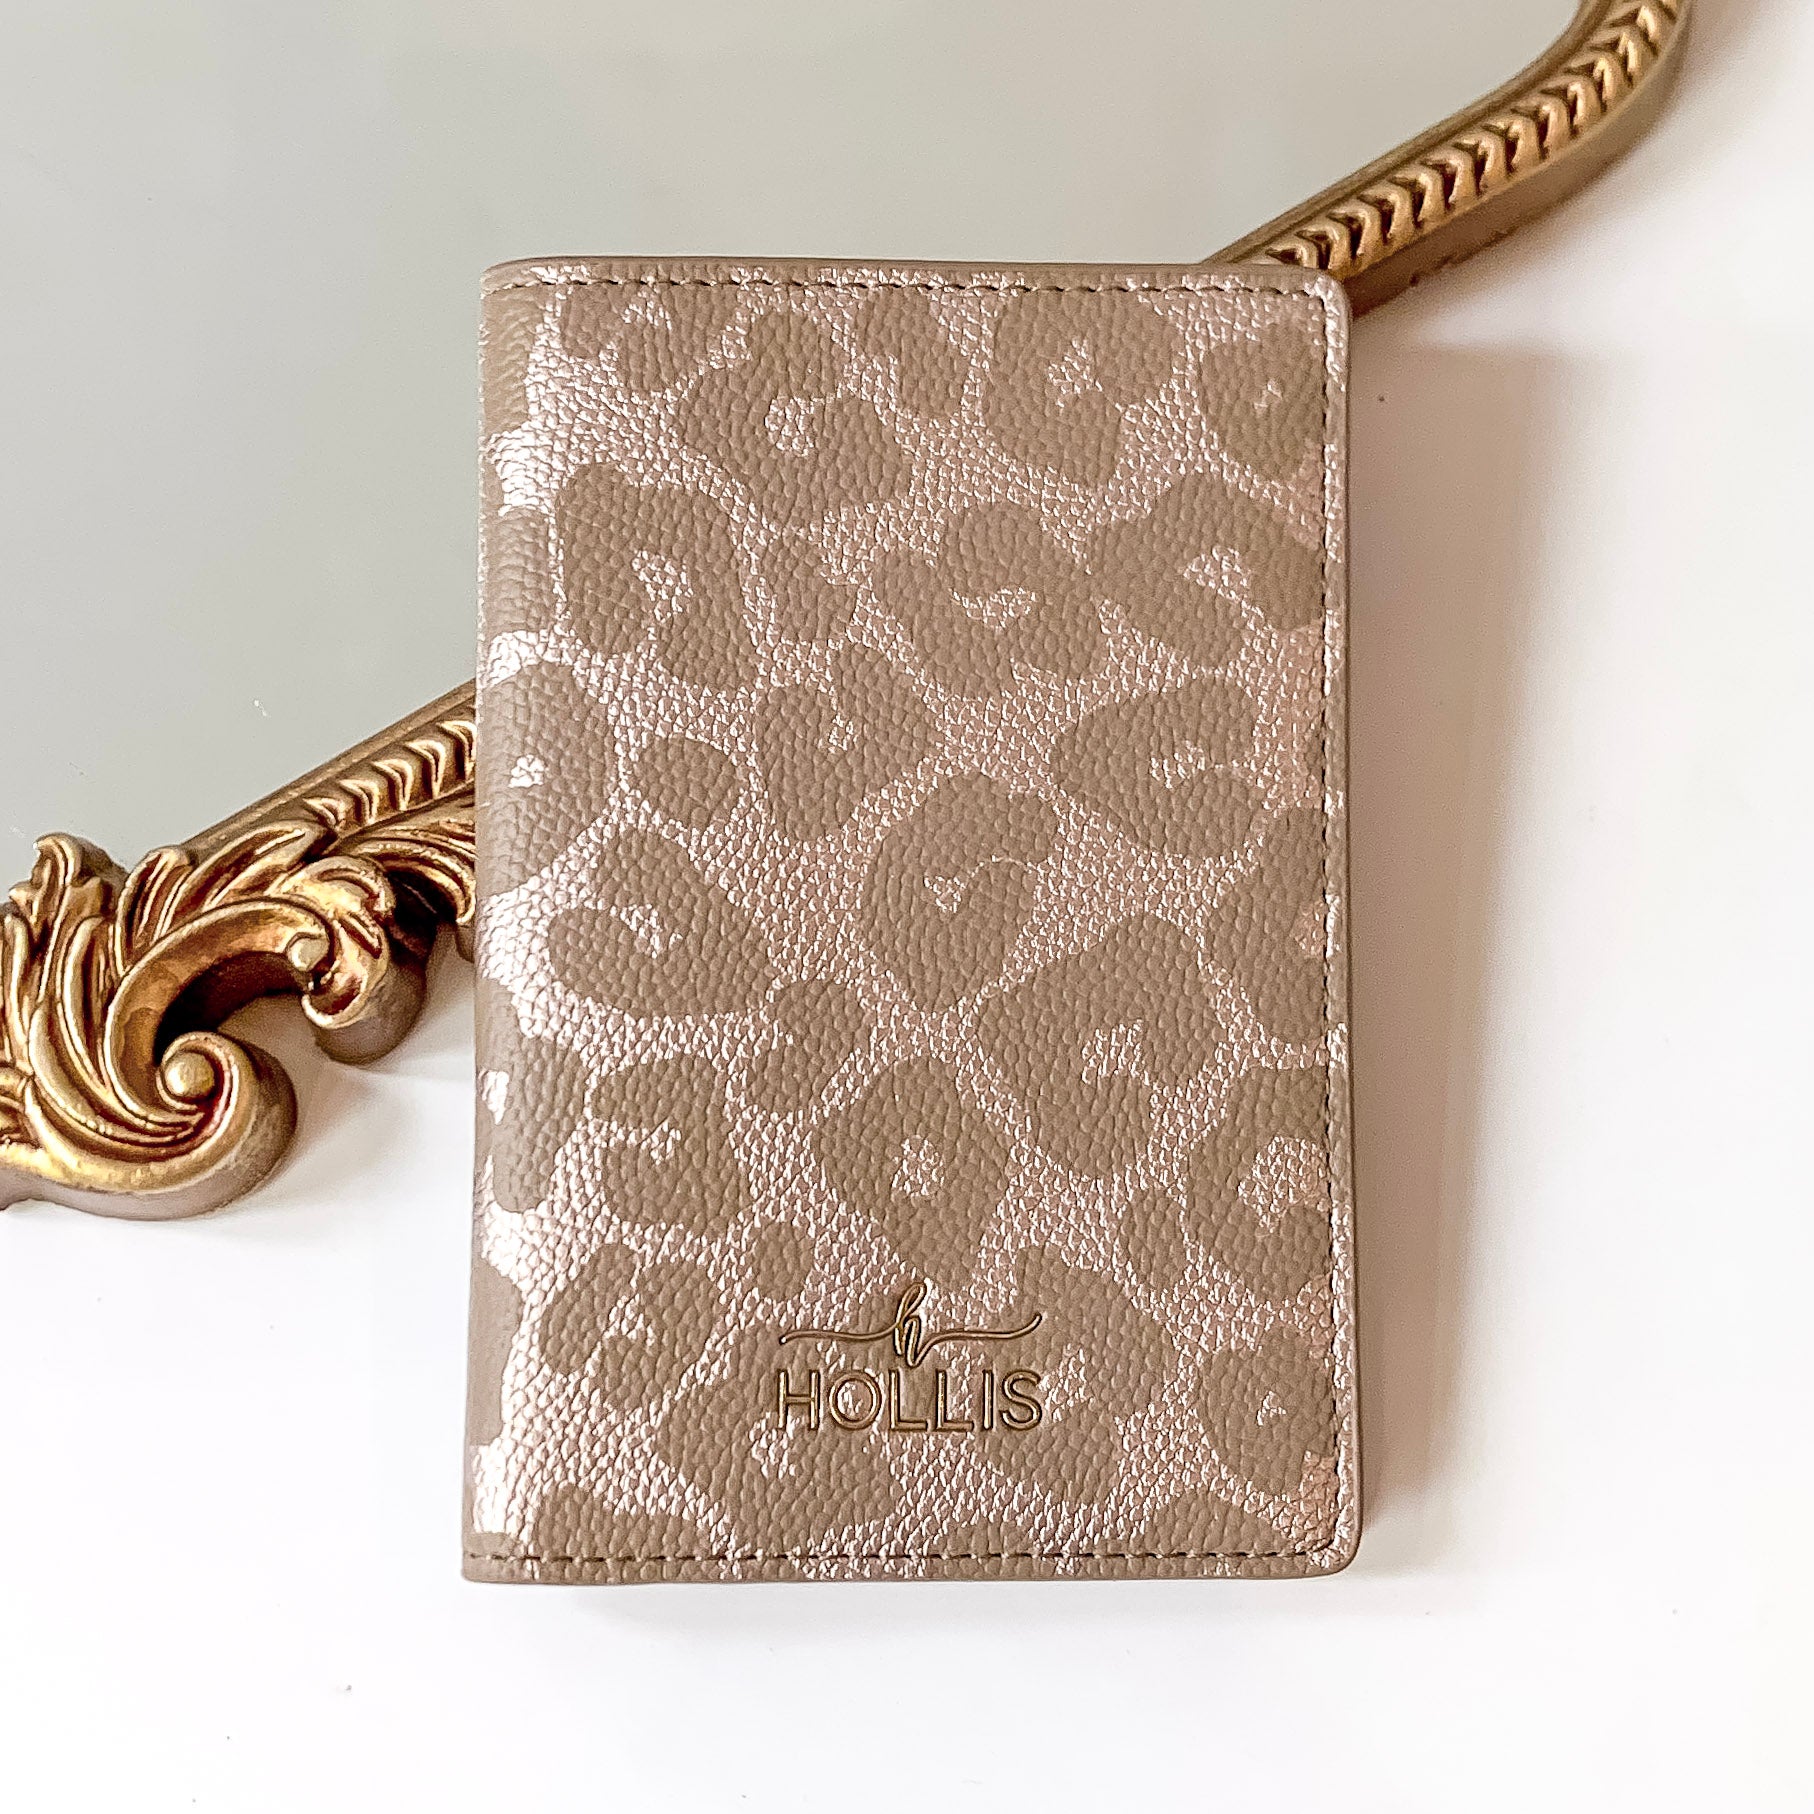 Leopard print passport holder with a gold HOLLIS emblem at the bottom. This is pictured laying partially on a gold mirror on a white background.